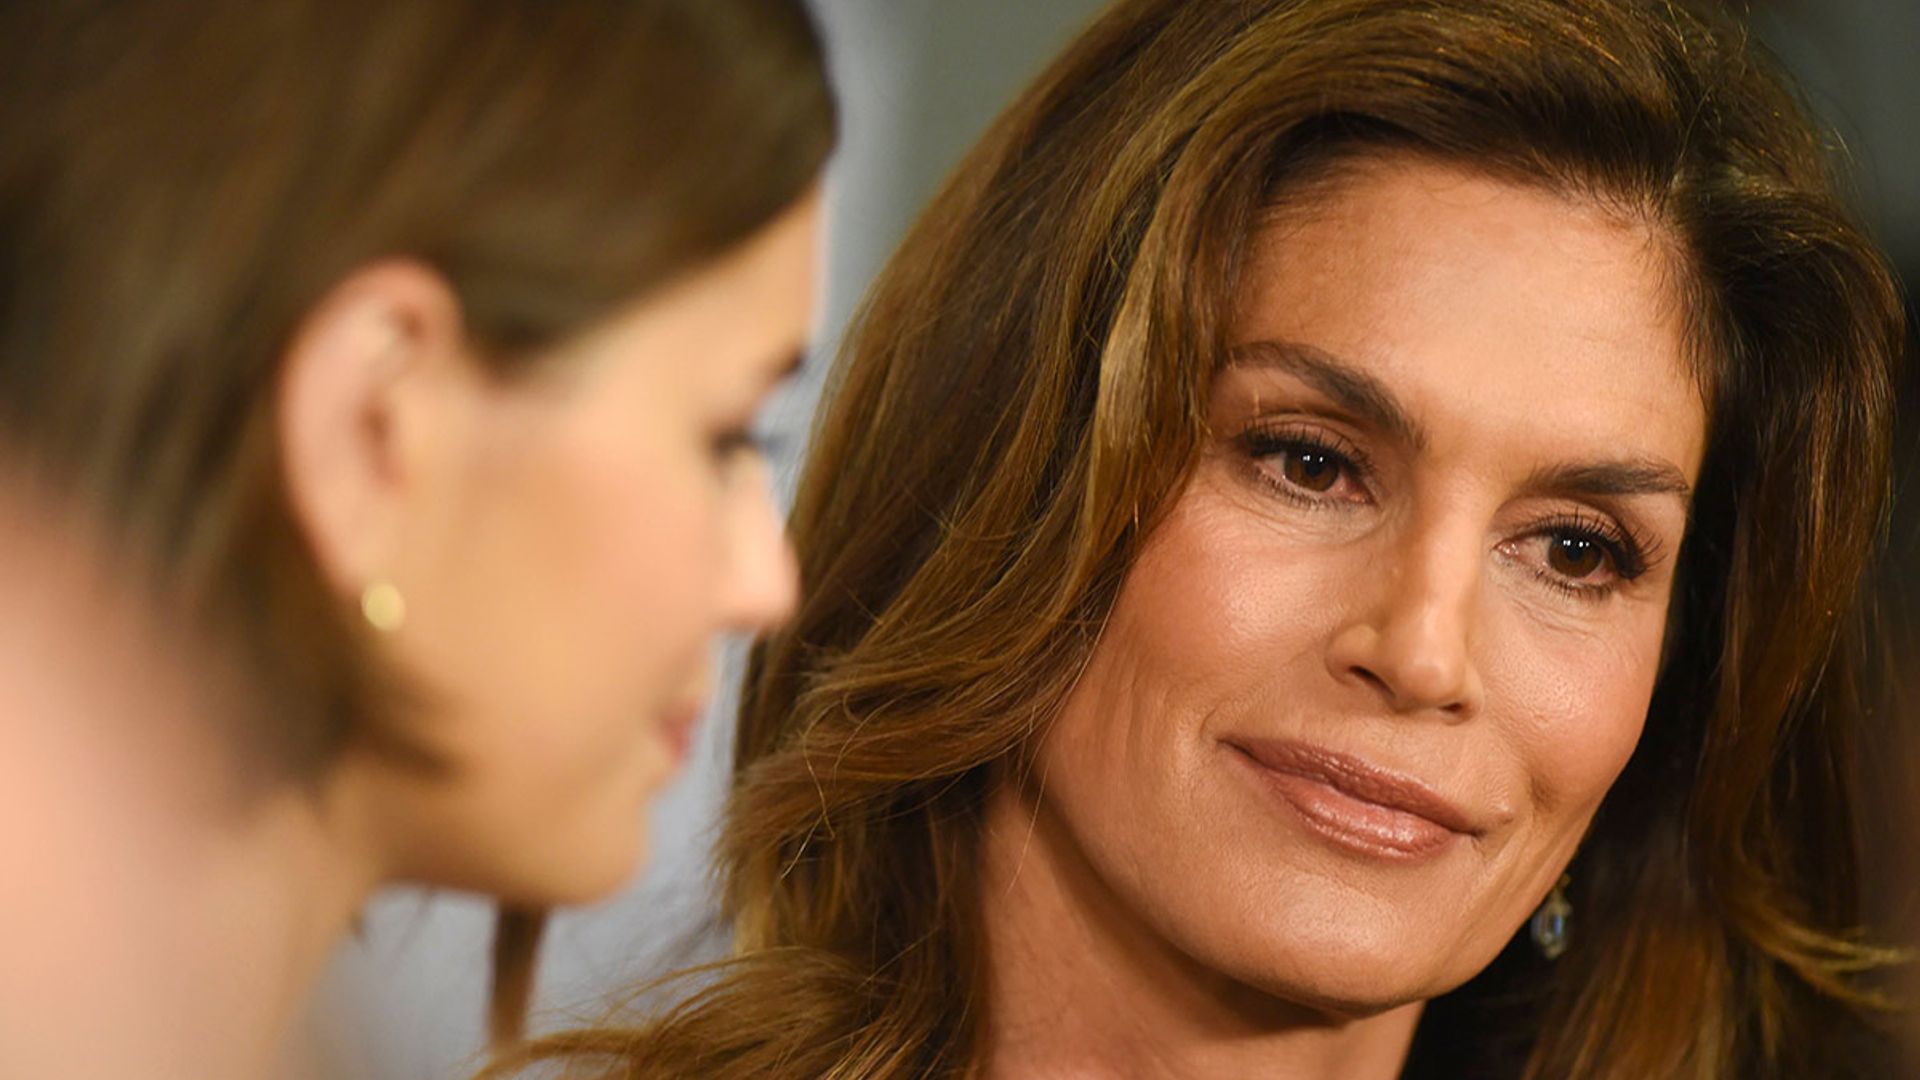 Cindy Crawford shares heartbreaking family news - famous friends react